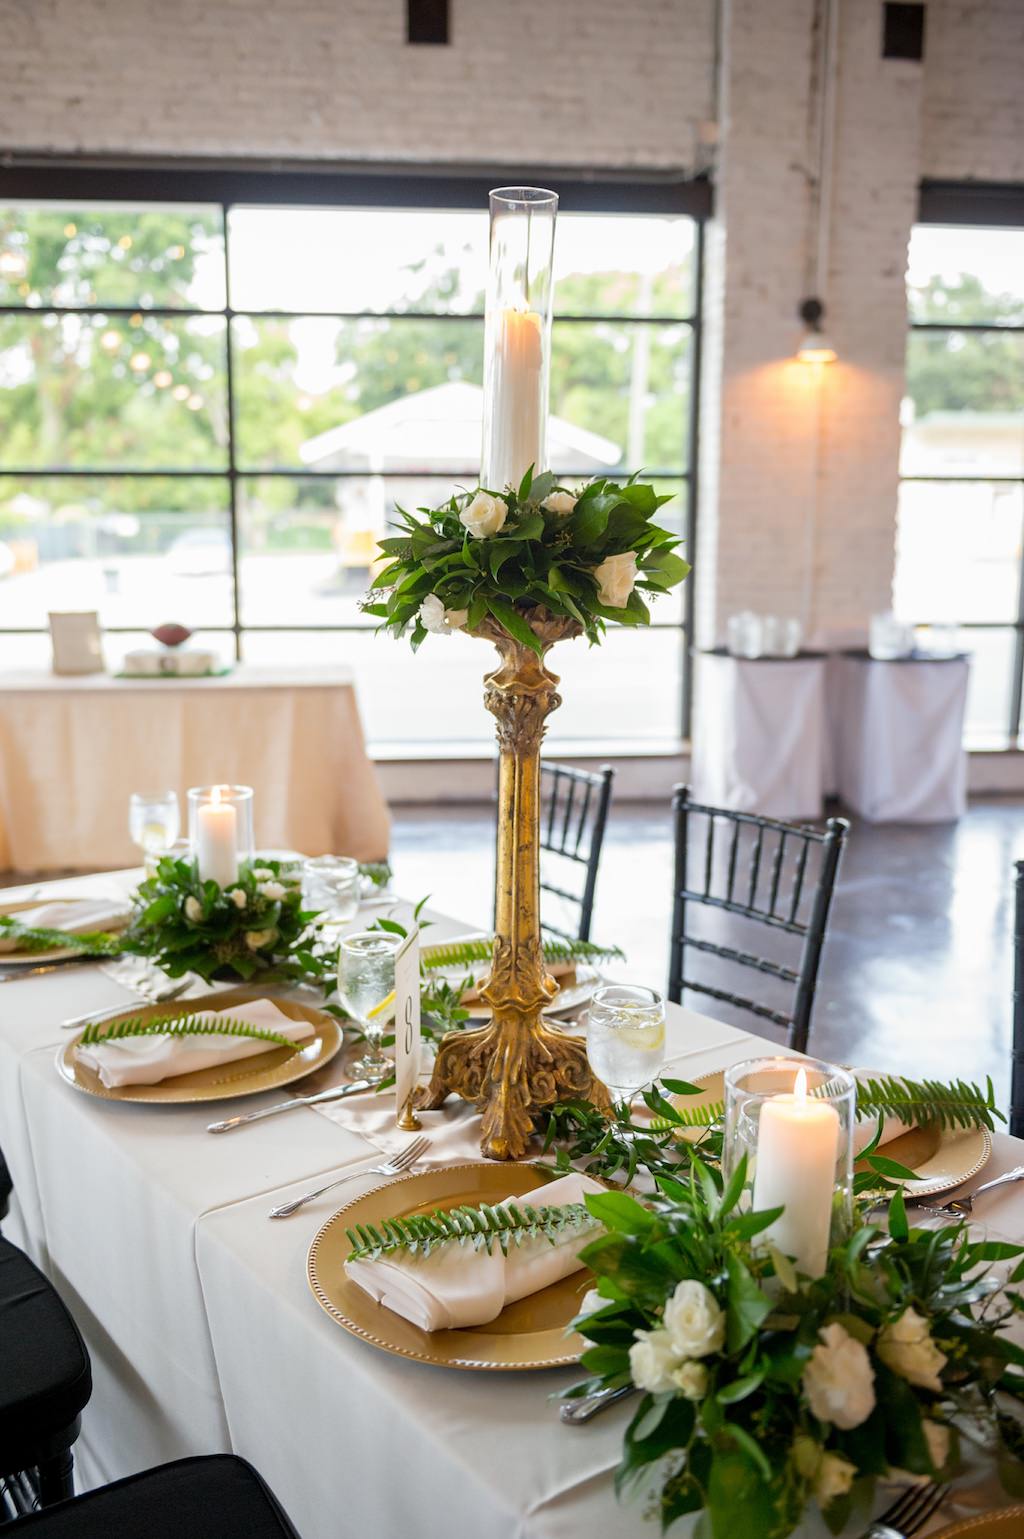 Wedding Reception Decor, Long Table with White Tablecloth, Gold Silk Table Runner, Gold Chargers, White Linen, Green Leaf, Tall Gold Candlestick with White Rose and Greenery Topper and Glass Cylinder Candle Holder and Black Chiavari Chairs | Tampa Bay Photographer Andi Diamond Photography | Rentals A Chair Affair